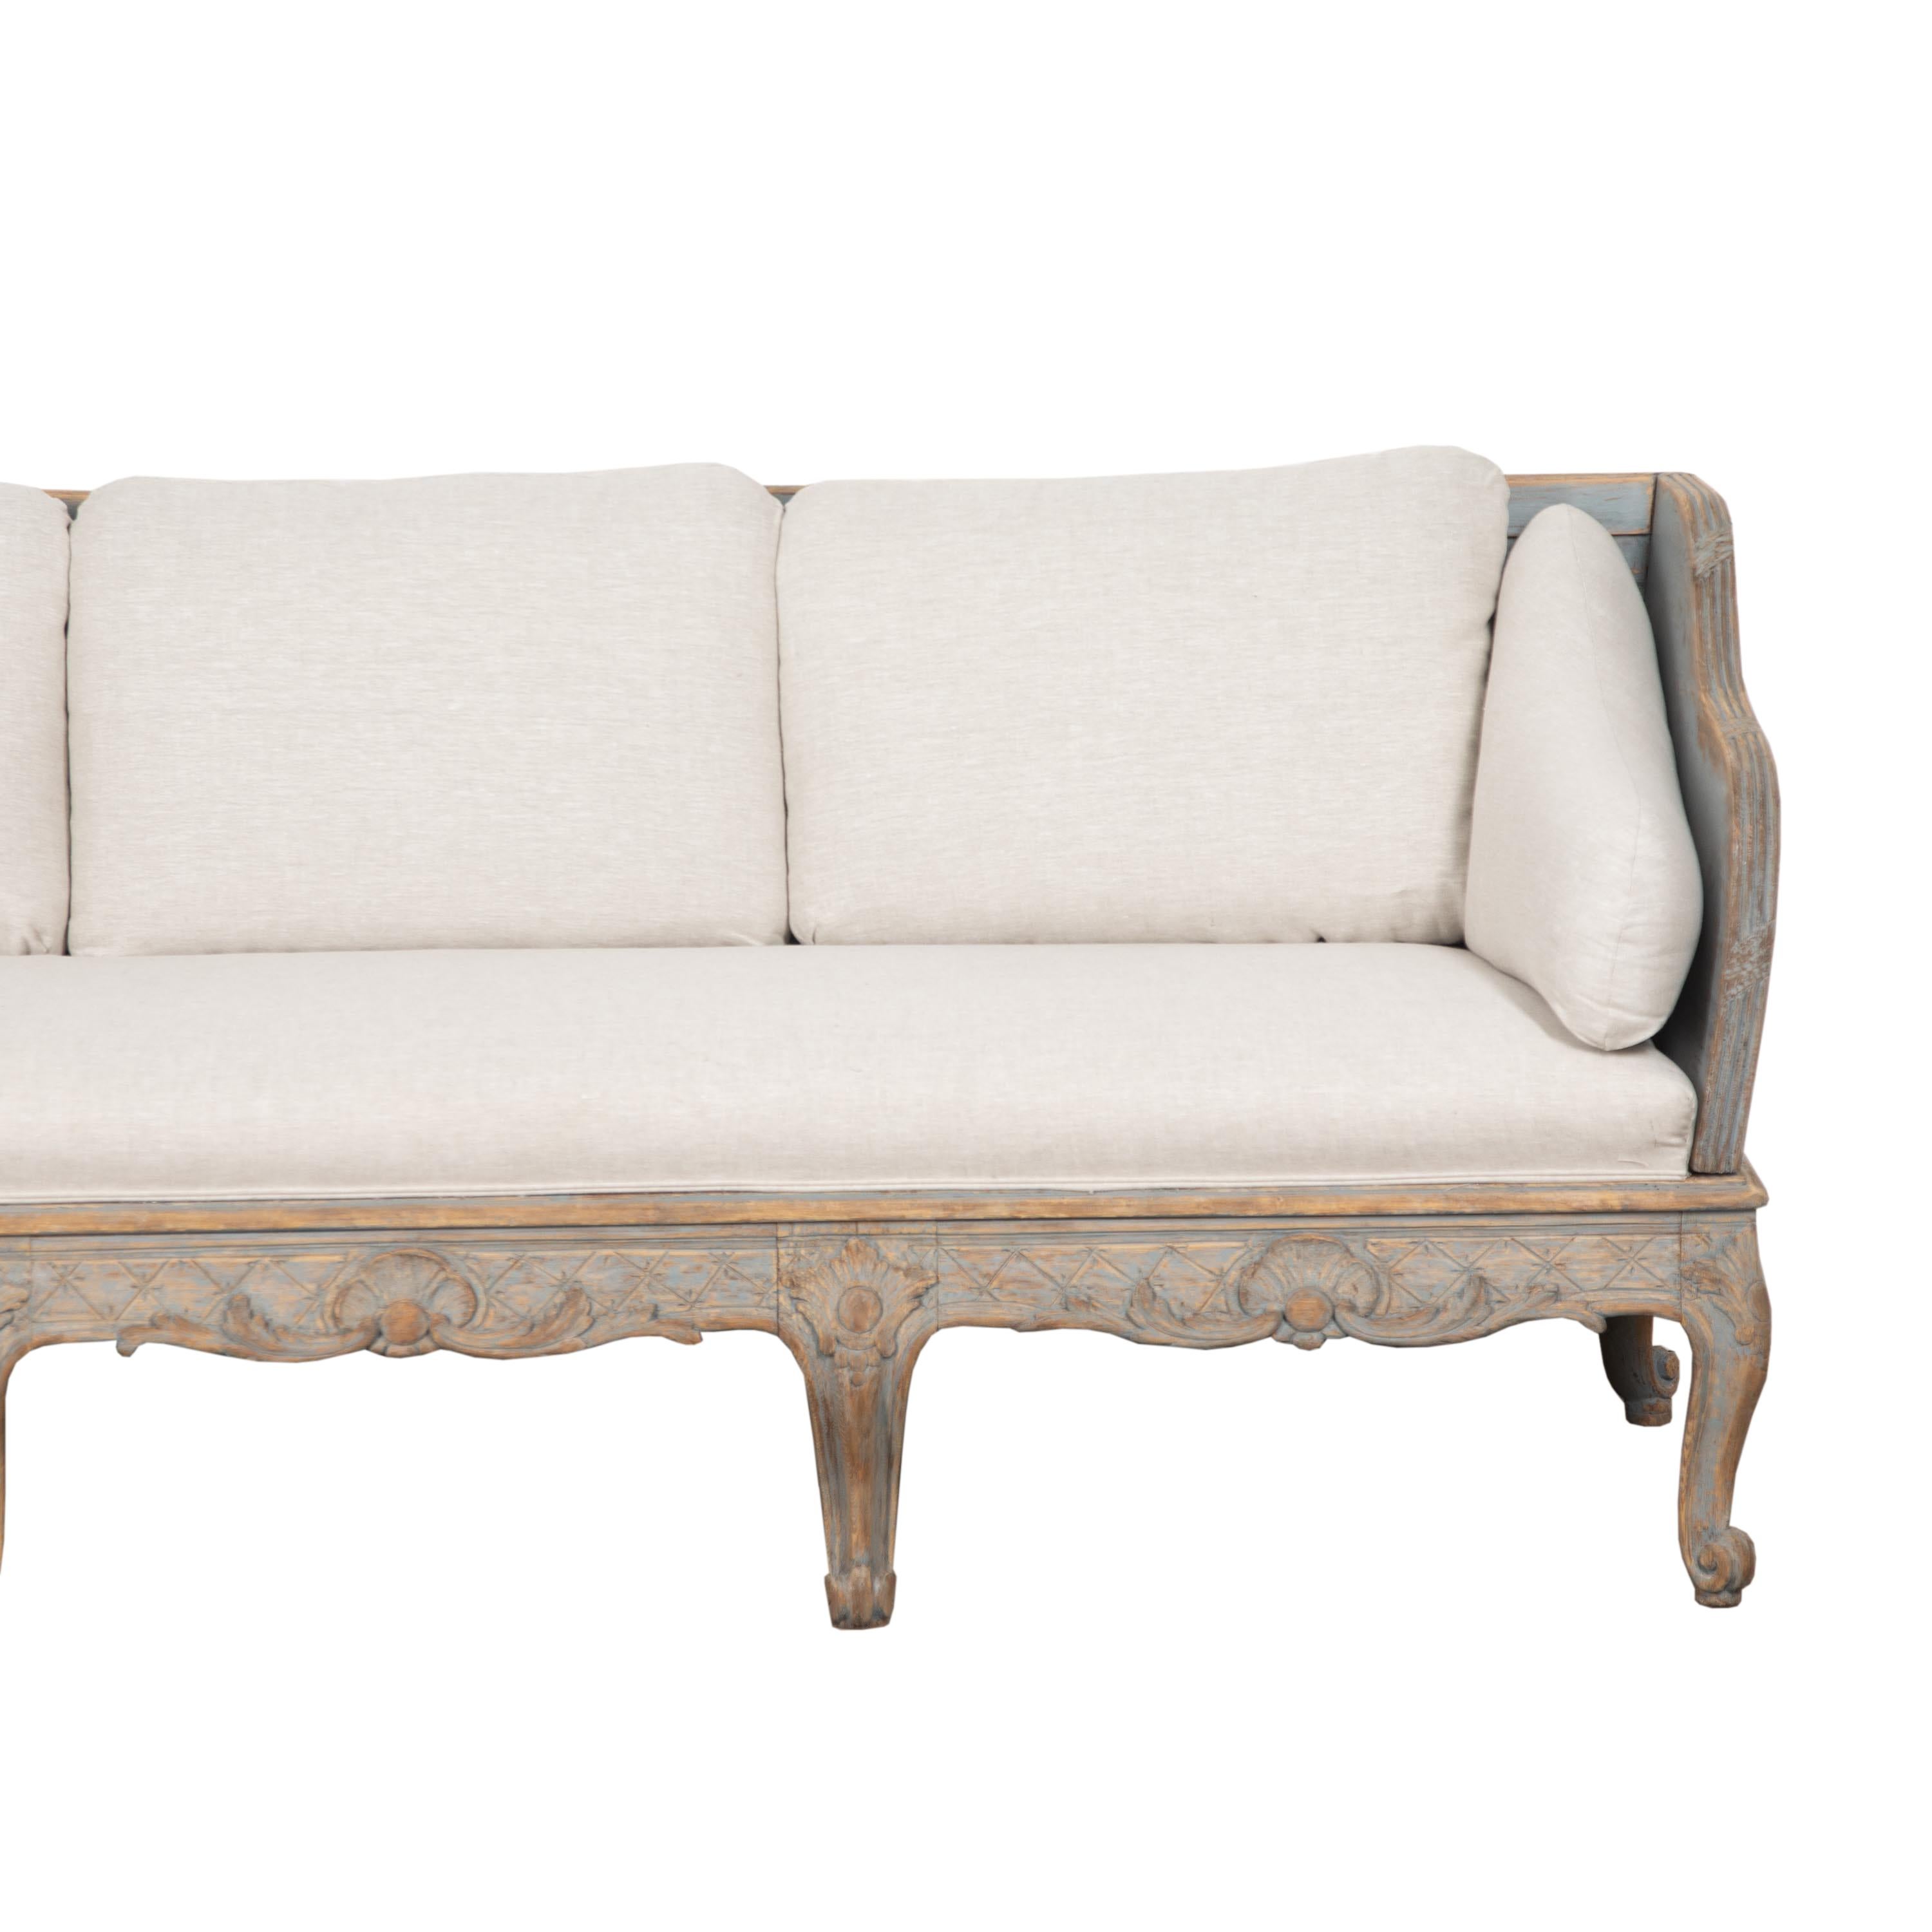 Period Rococo tragsofa sofa.
Dating to the 18th century with decorative shell and leaf carving to the front stretcher, continuing along the sides with further diamond decoration.
With ribbon and reed carving along the sides and